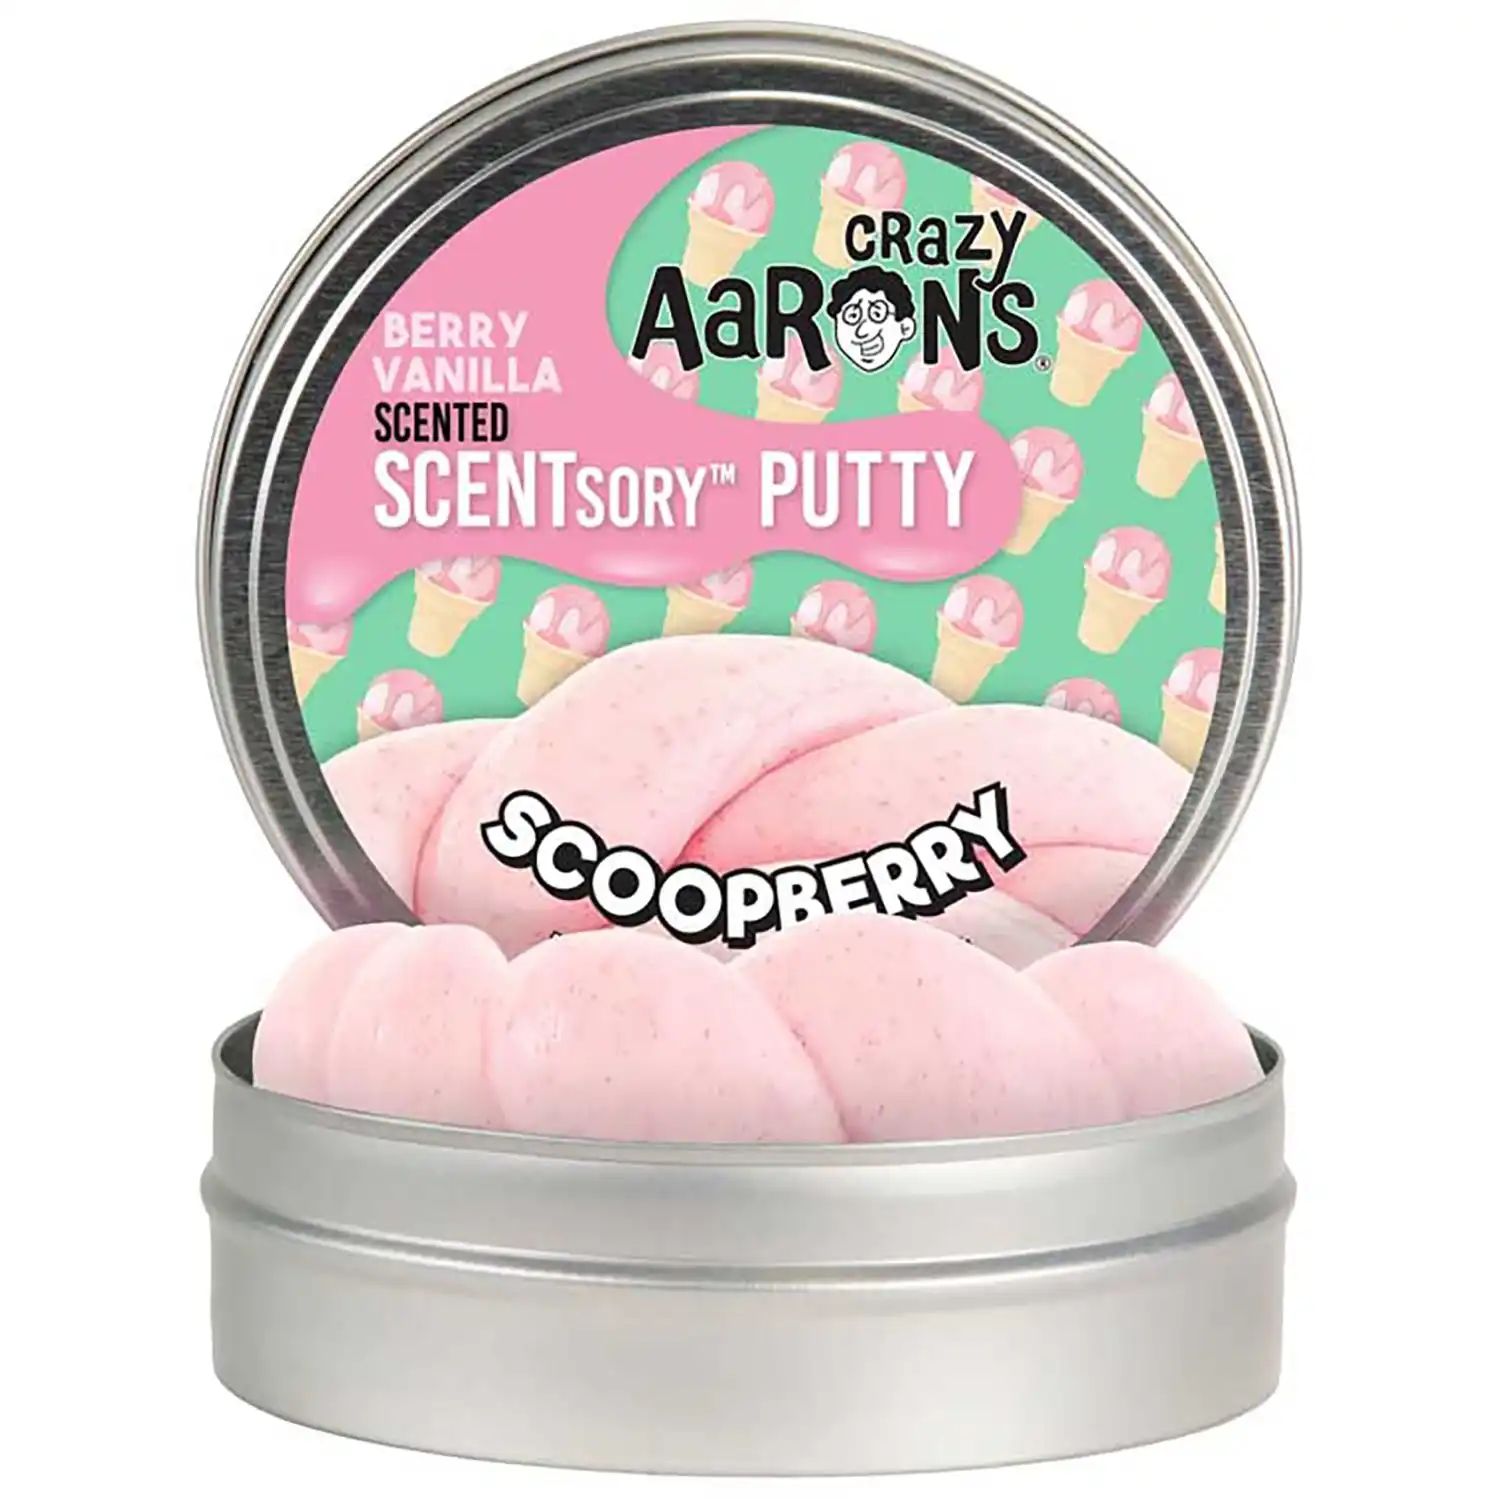 Aaron's Putty Scoopberry - Scentsory